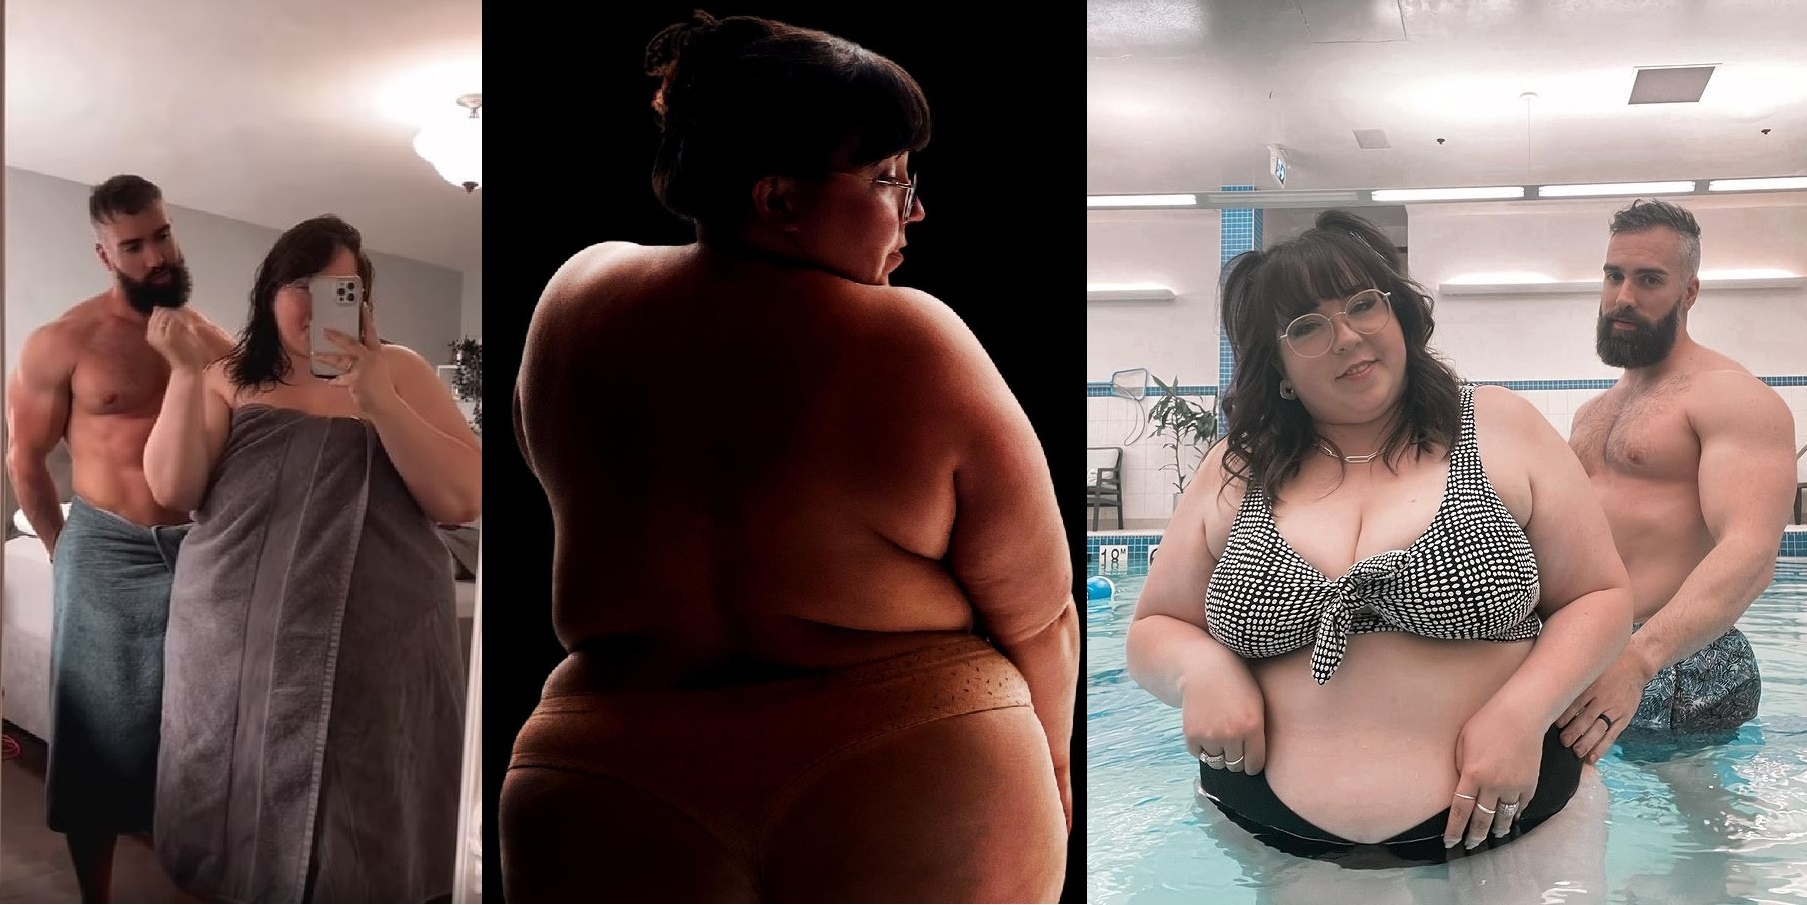 Plus size woman with super ripped hubby shares pics on Instagram defying the trolls